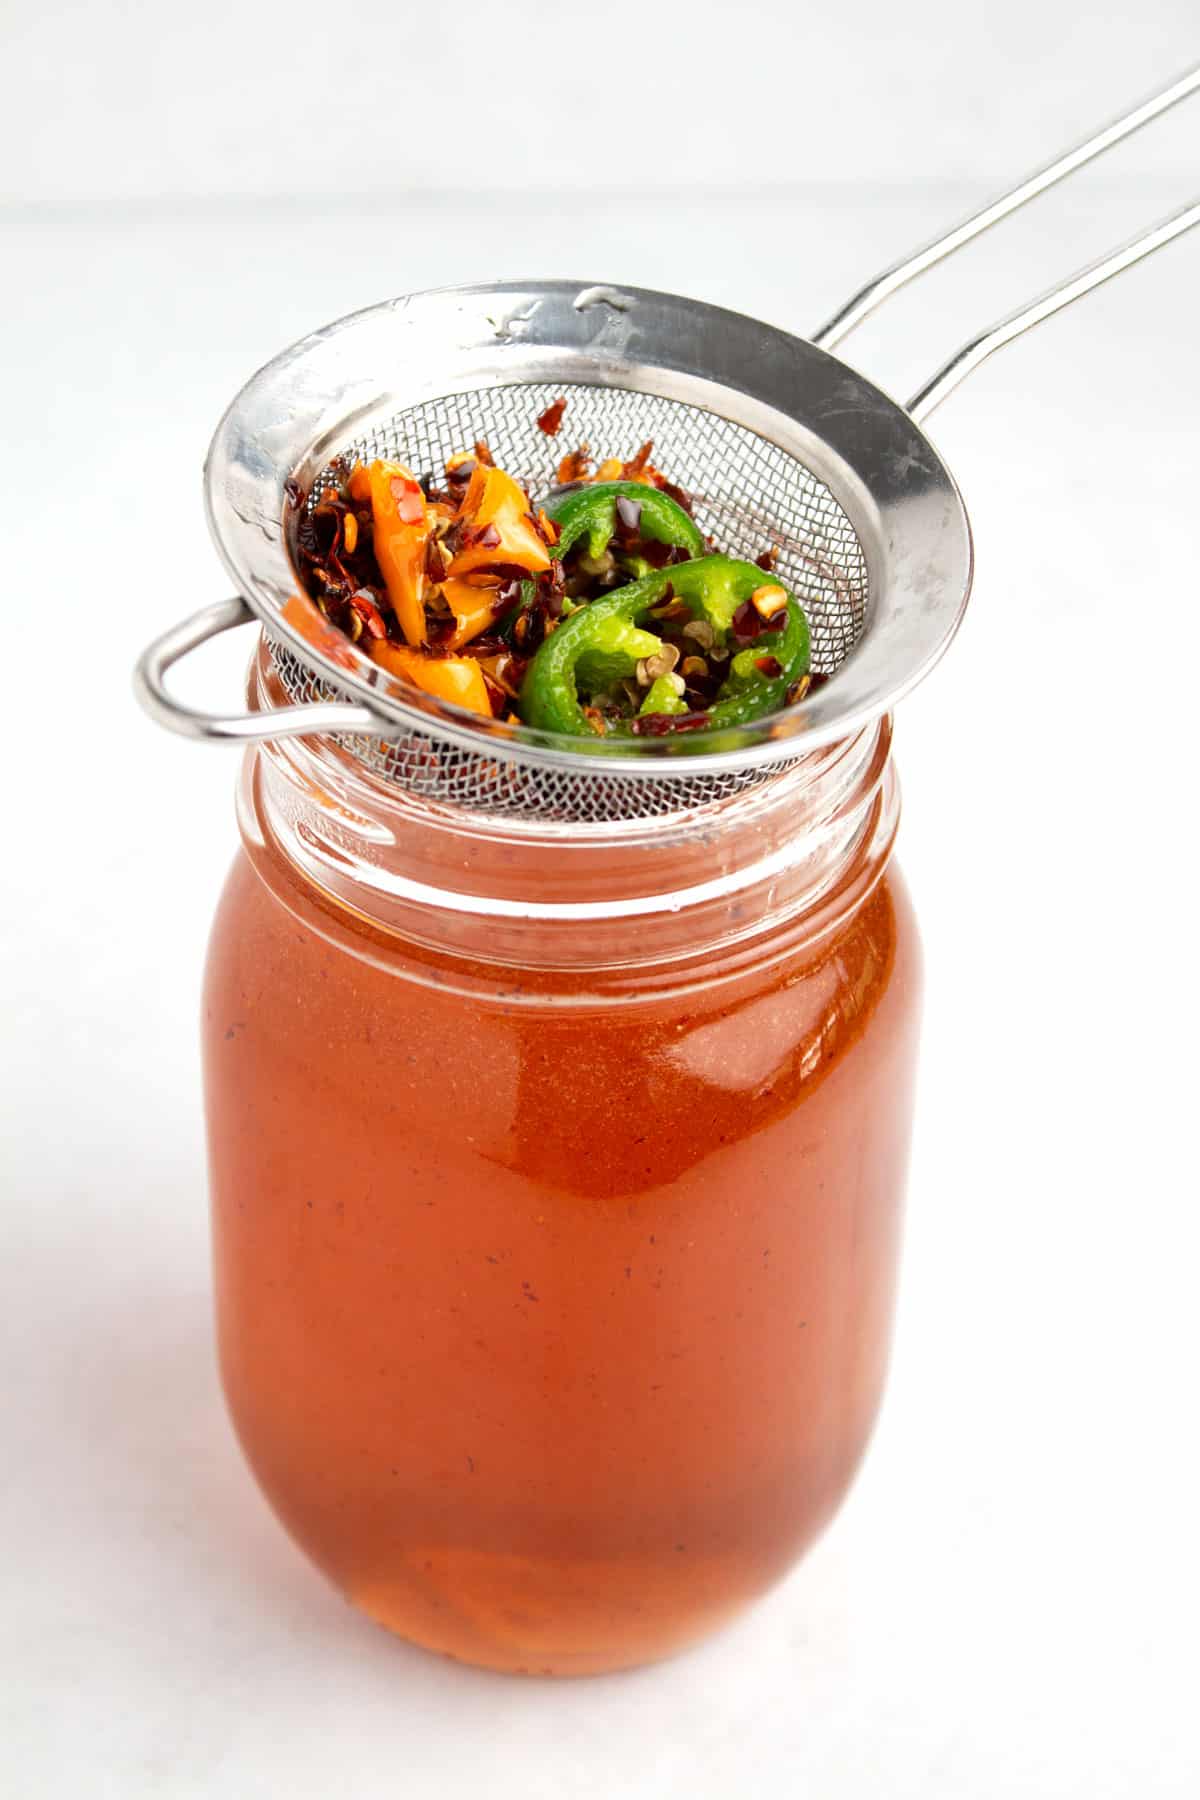 Glass jar full of honey with a strainer on the top full of red pepper flakes and sliced peppers.